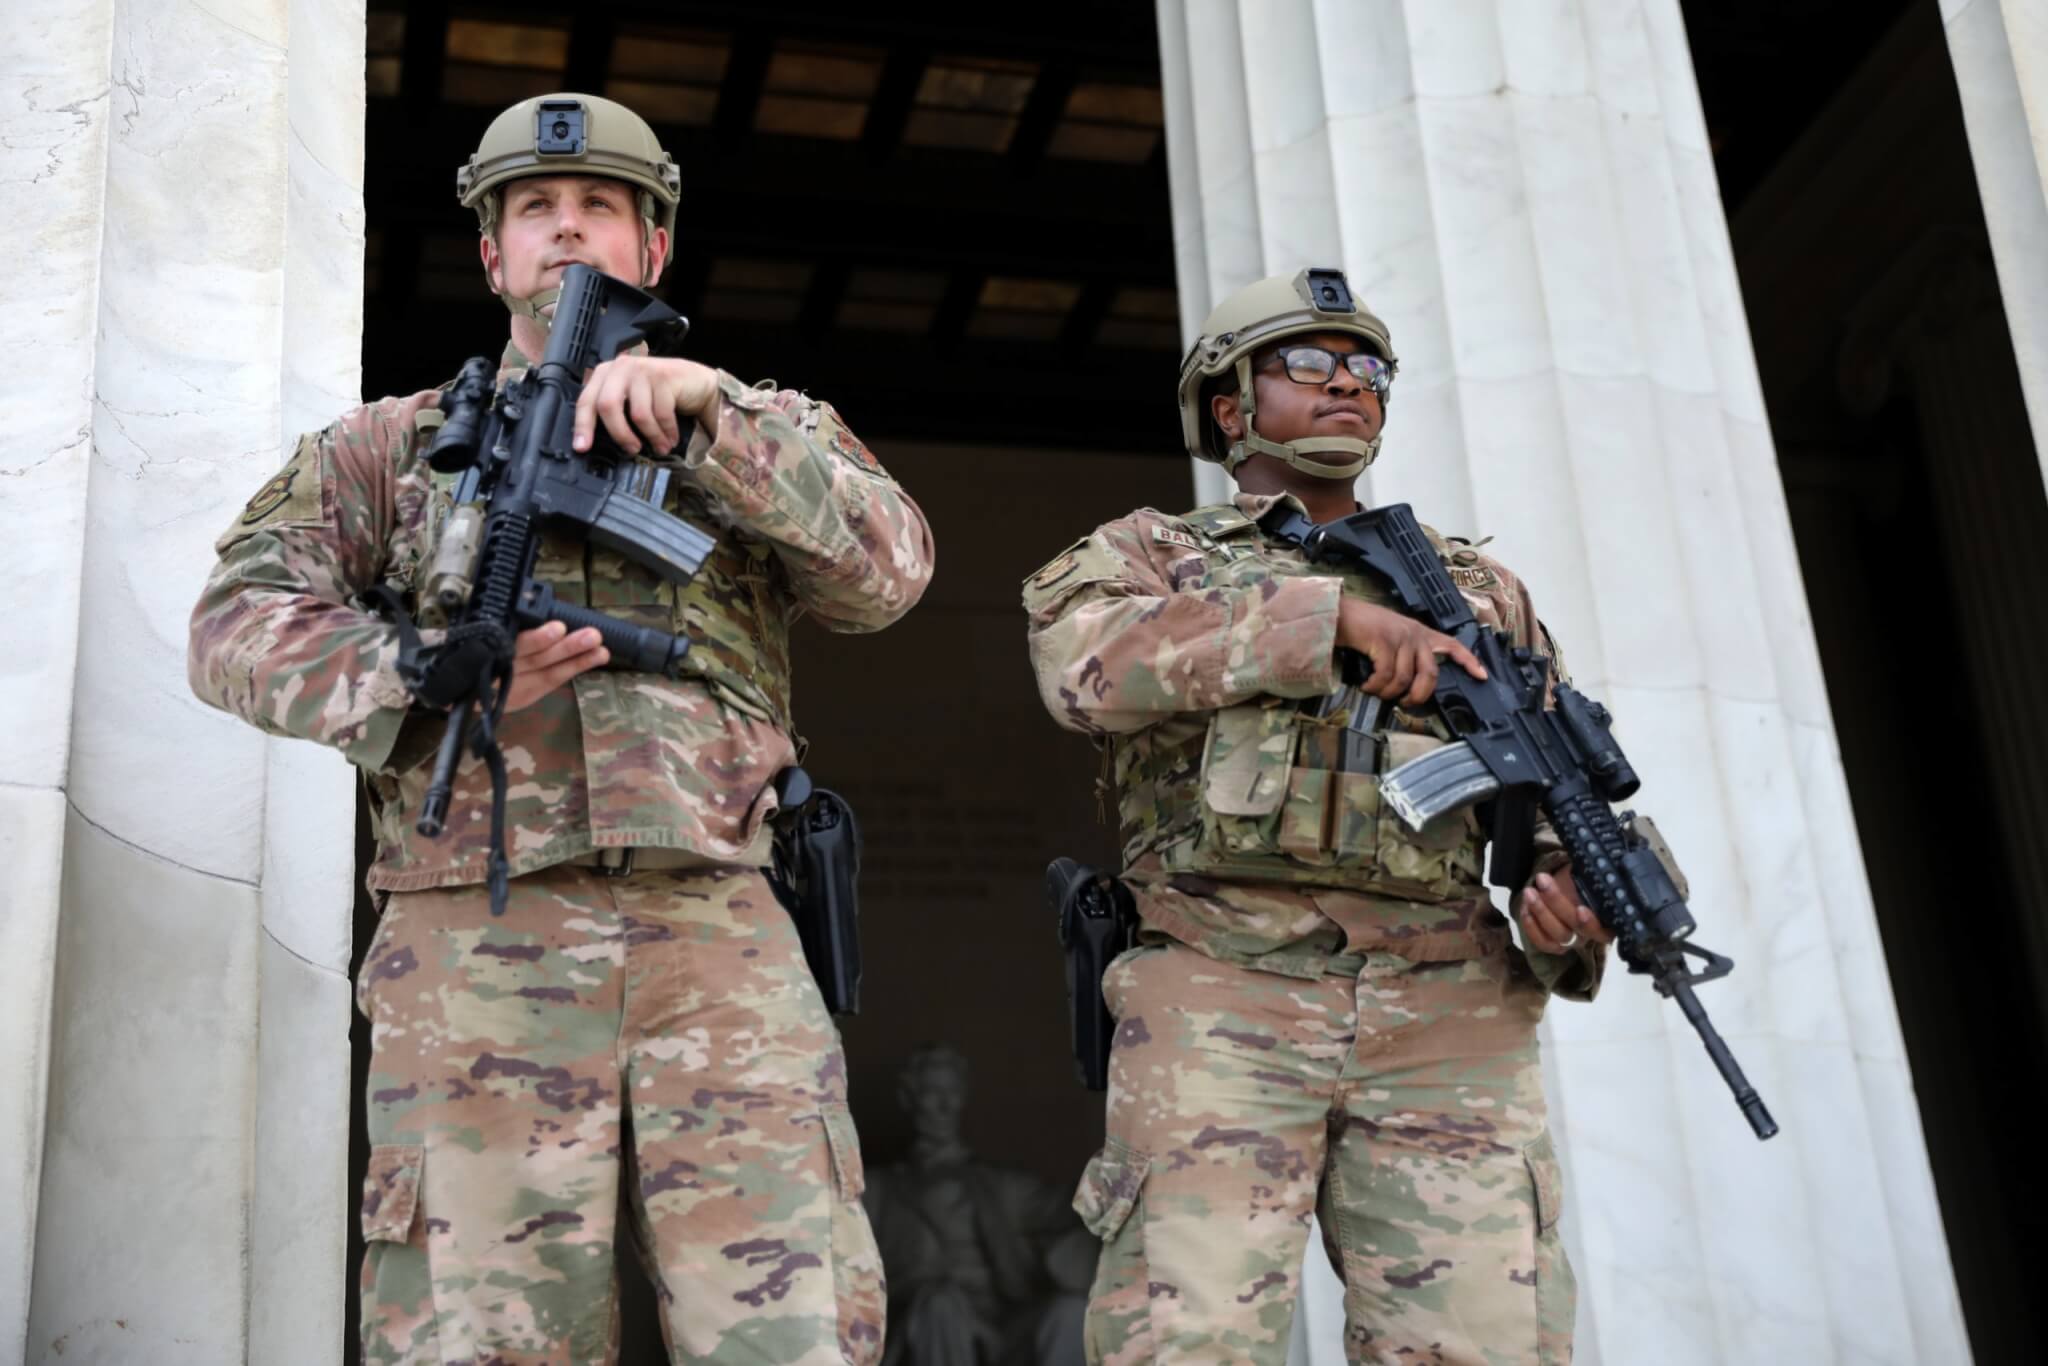 District of Columbia National Guard airmen stand guard at the Lincoln Memorial in Washington, D.C. in response to protests and riots after the death of George Floyd. U.S. Army photo by Kevin Valentine.